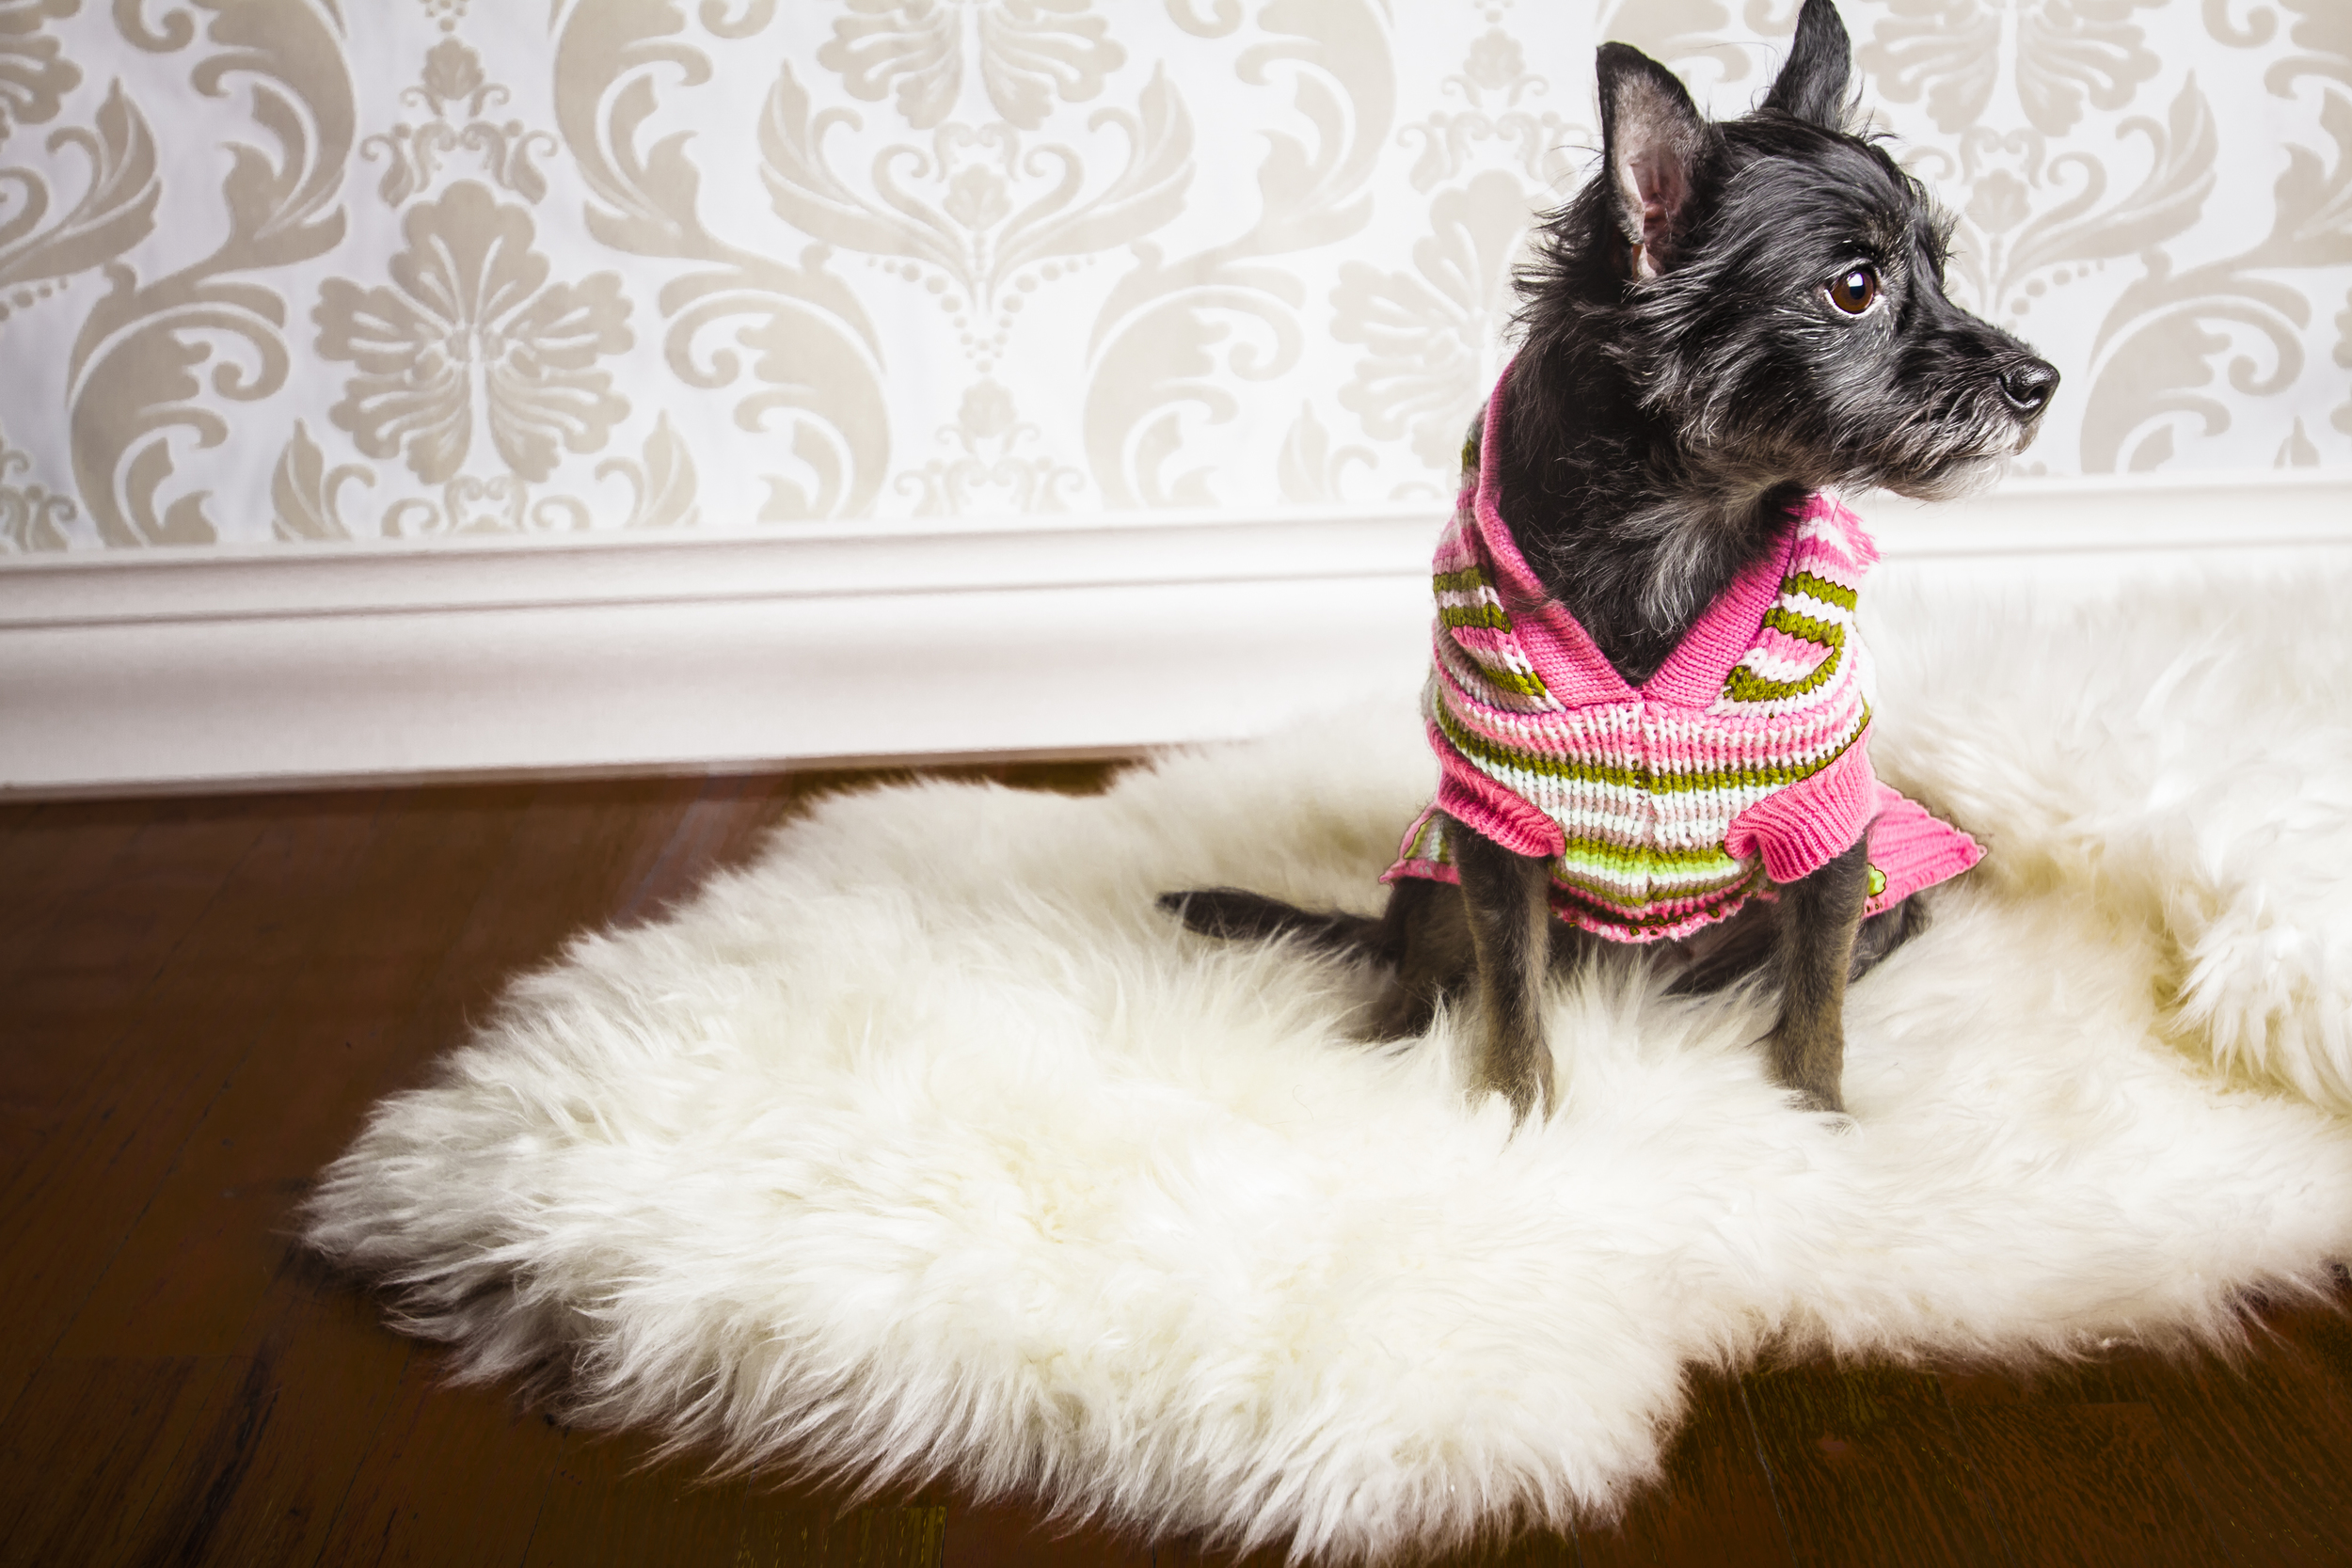 11 Small dog holiday studio pet photography session vintage background  with sweater on white fur rug.jpg